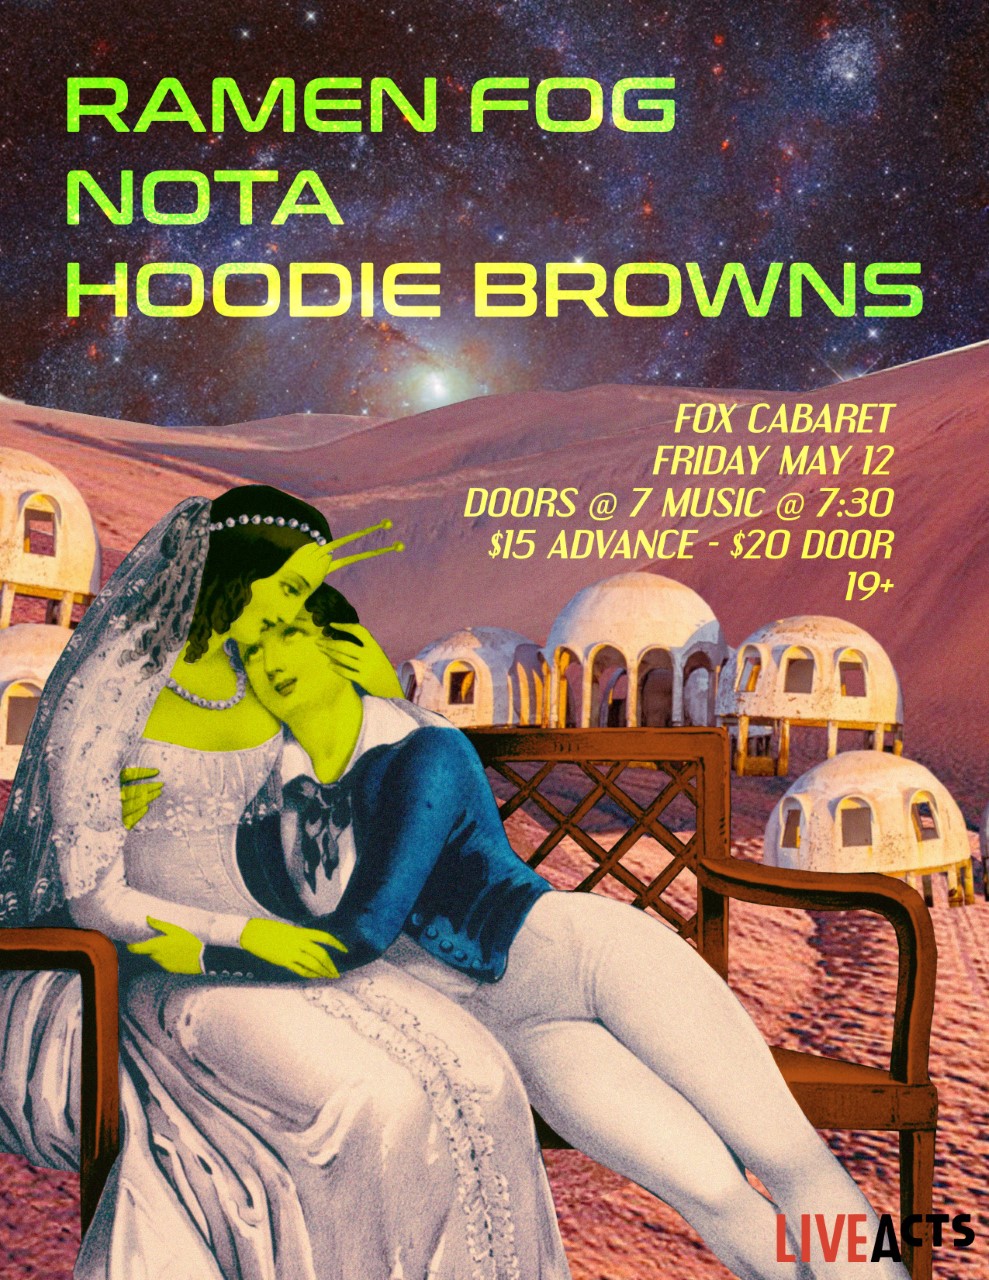 Ramen Fog with Special Guests NOTA and Hoodie Browns